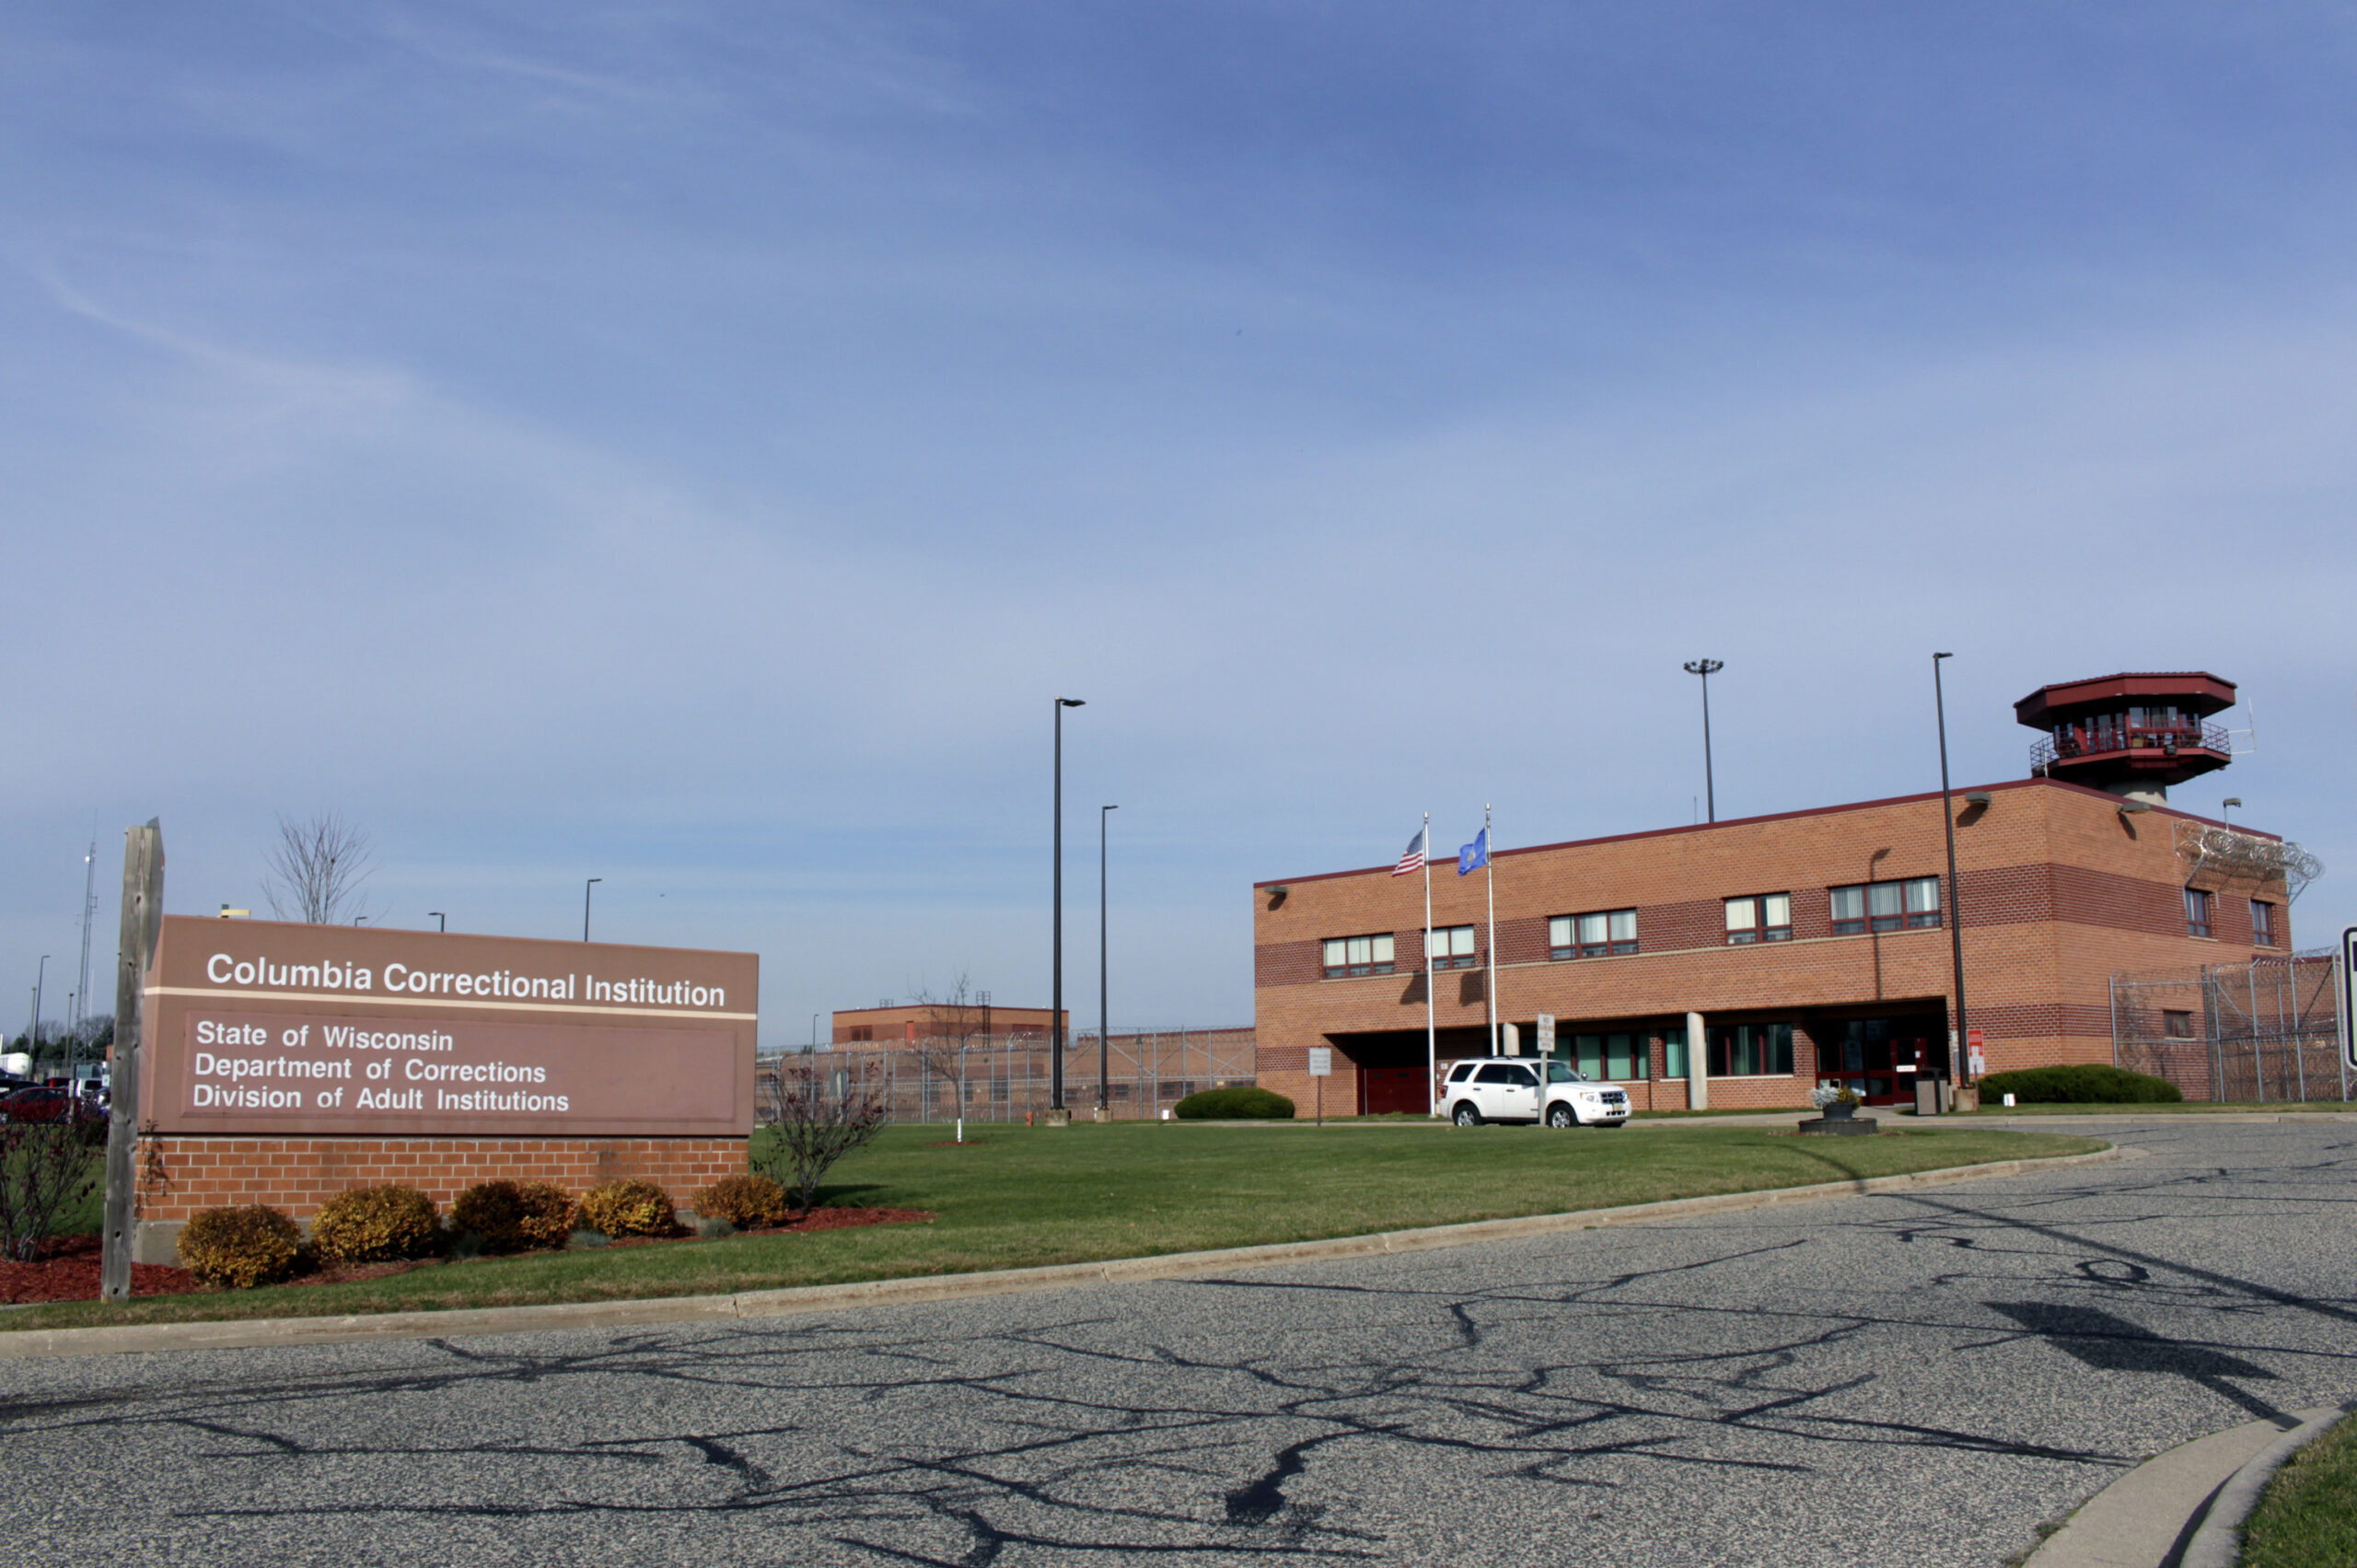 Columbia Correctional Institution in Portage, Wis.